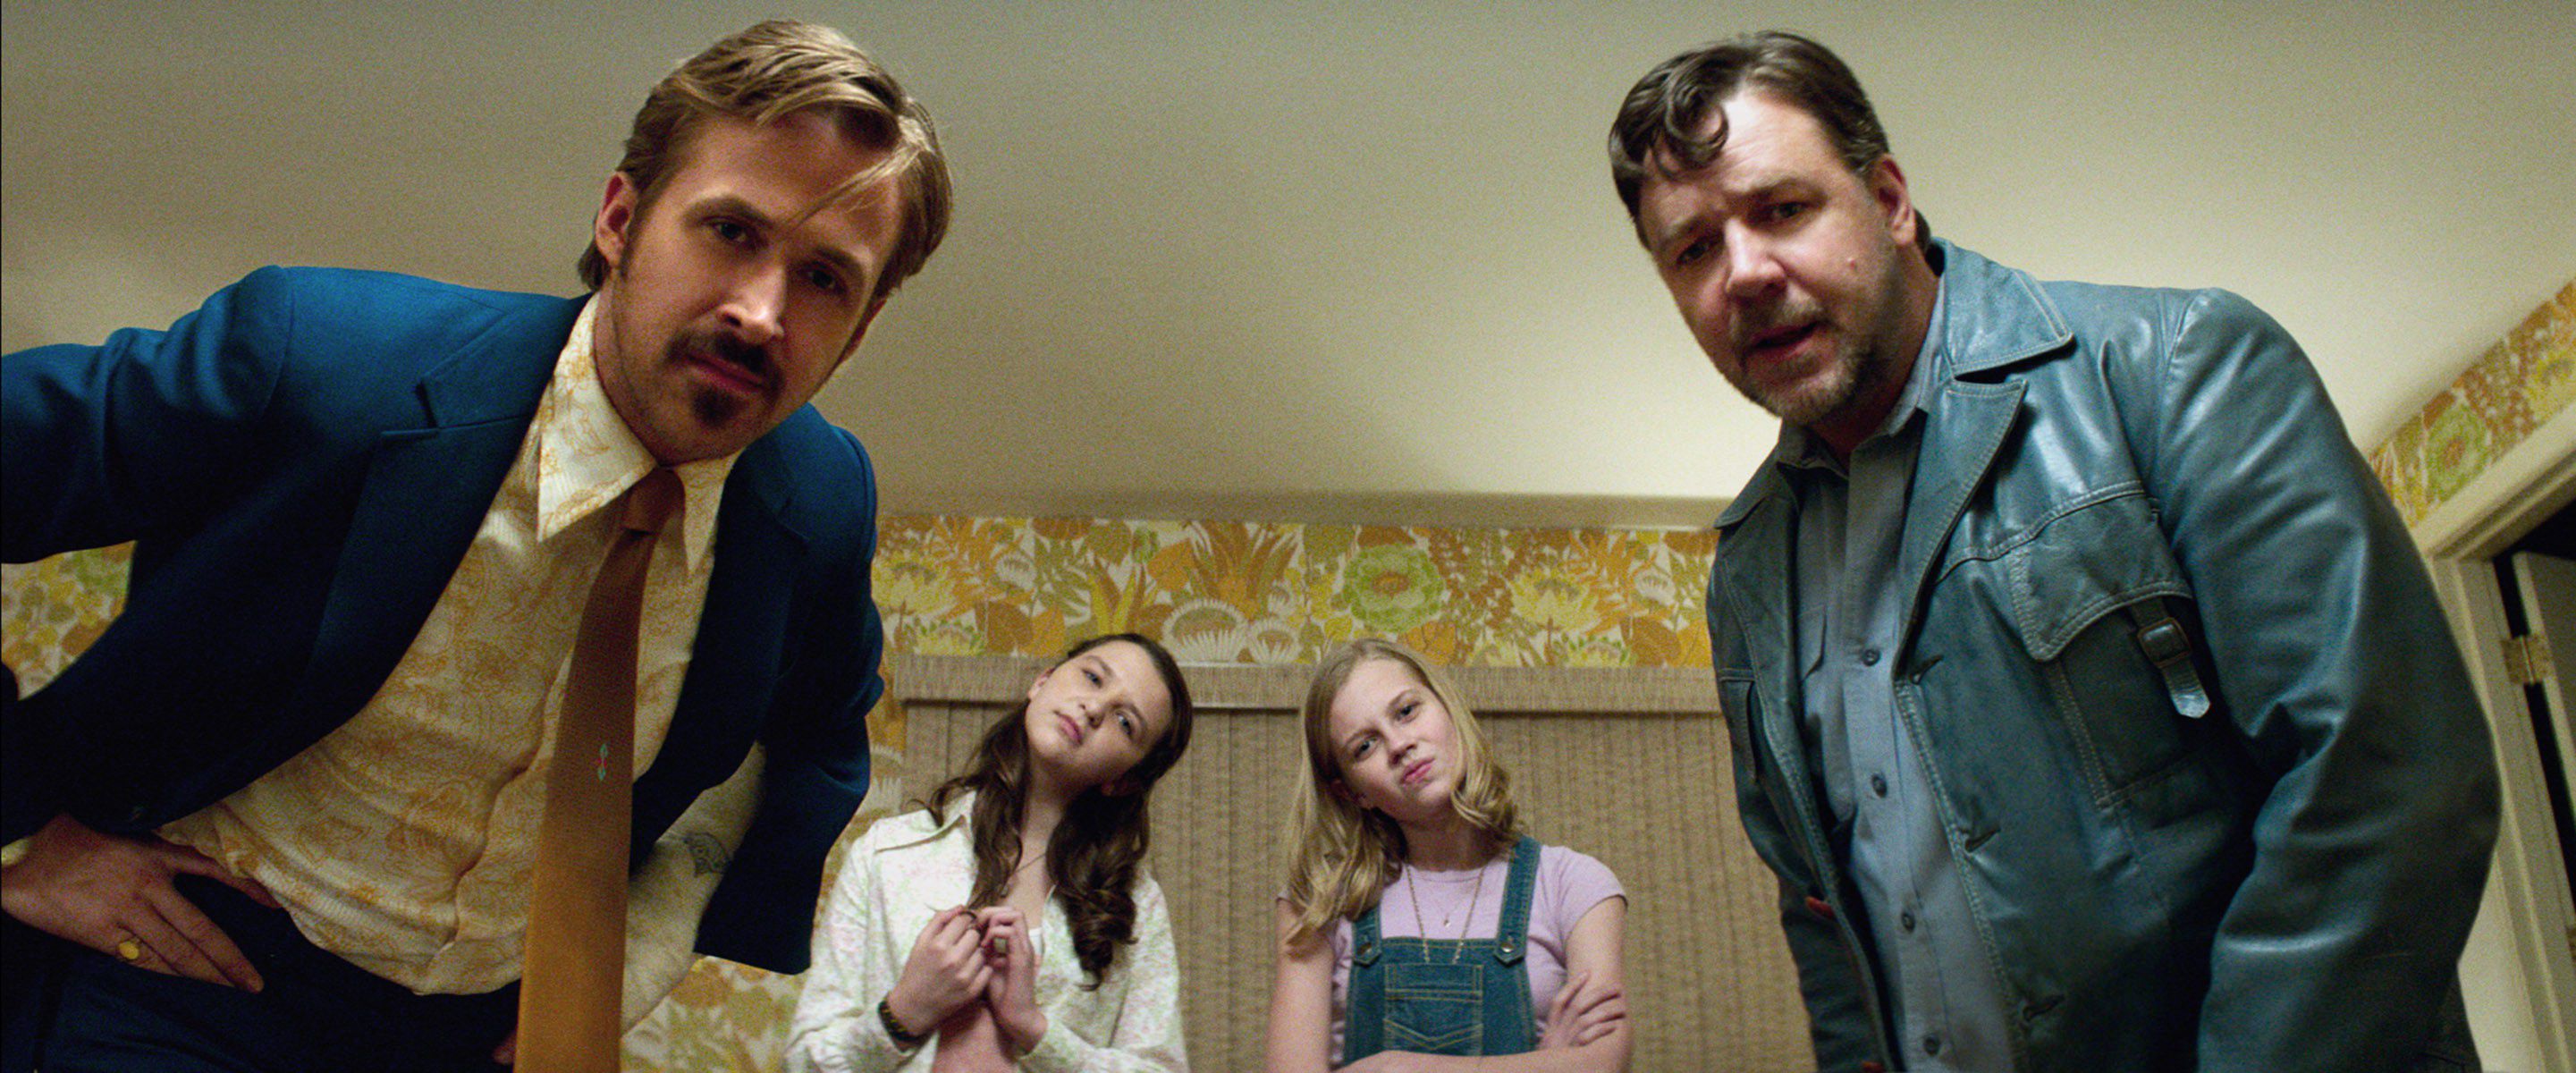 Ryan Goslling and Russell Crowe peer into the camera in The Nice Guys